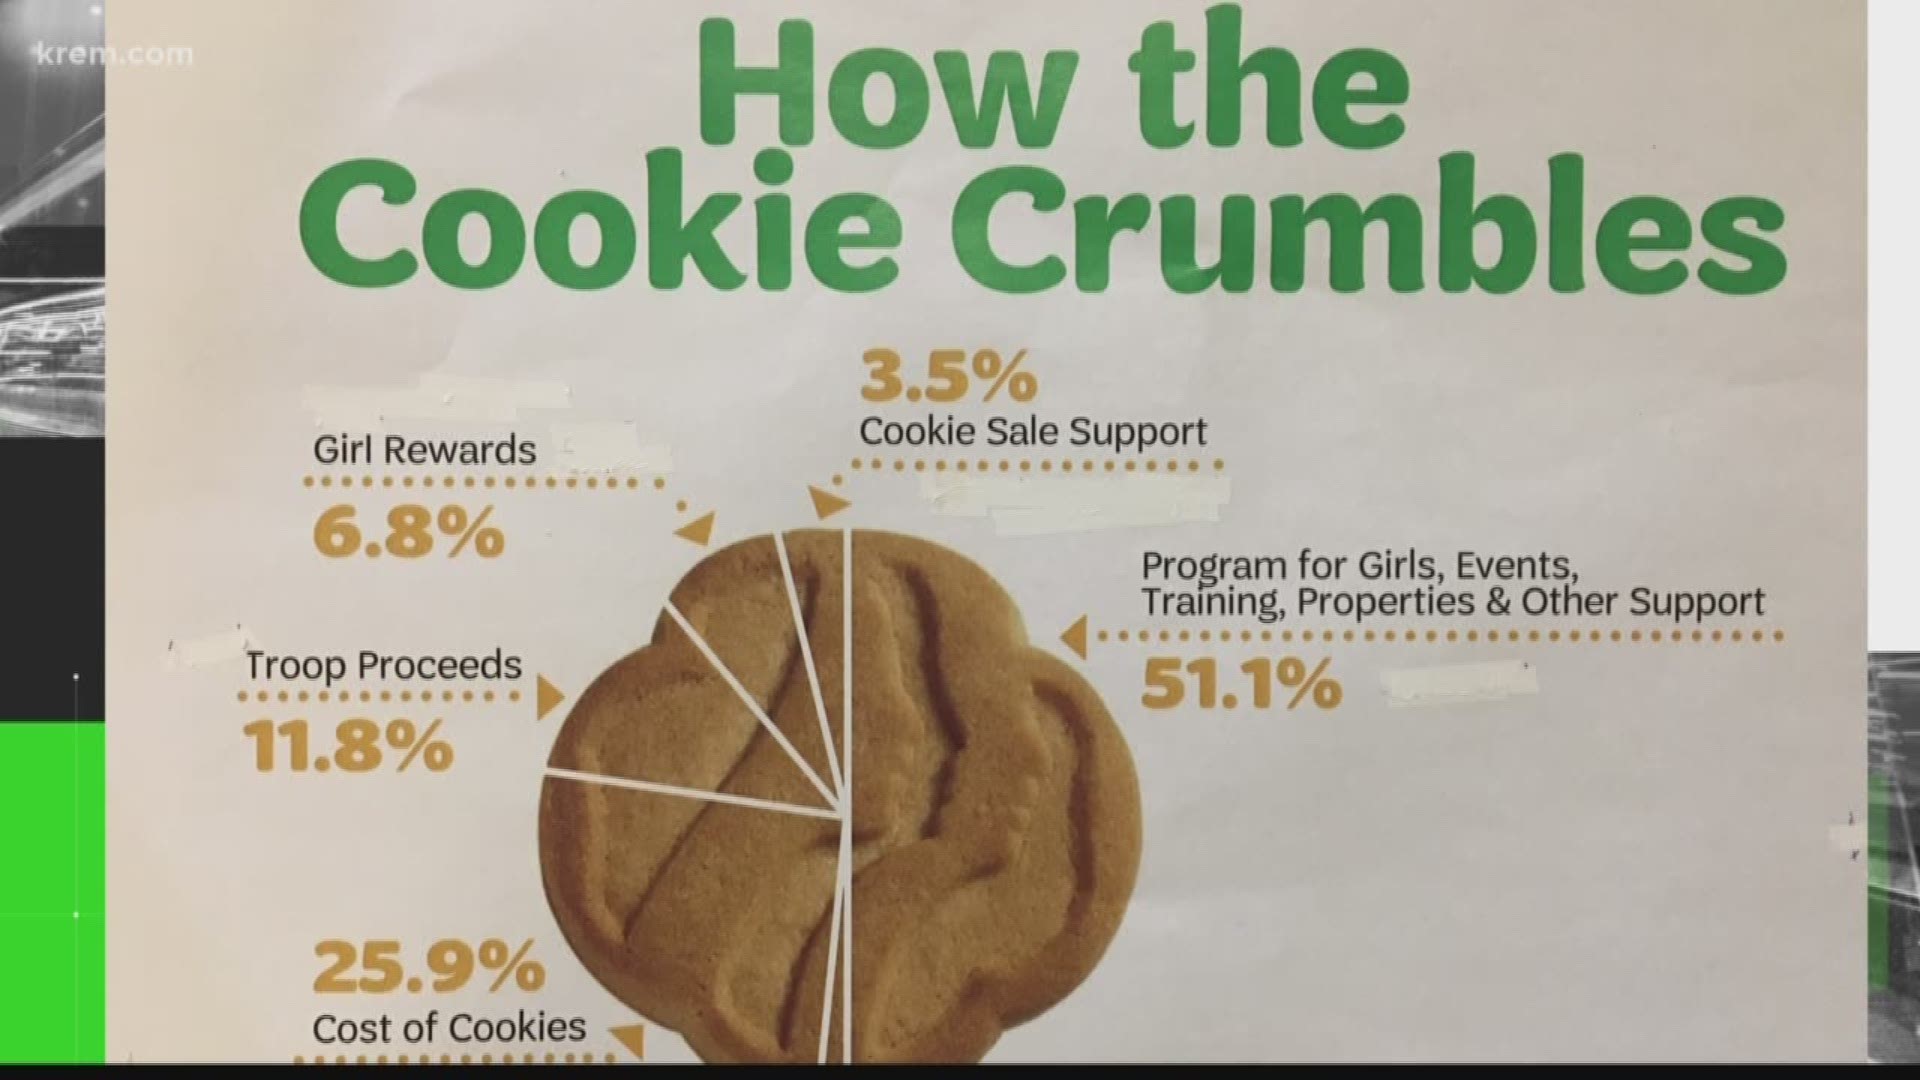 The Spokane County Republican party's question was followed by multiple links suggesting Girl Scouts have joined with Planned Parenthood, and the non-profit benefits from some of the cookie revenue.